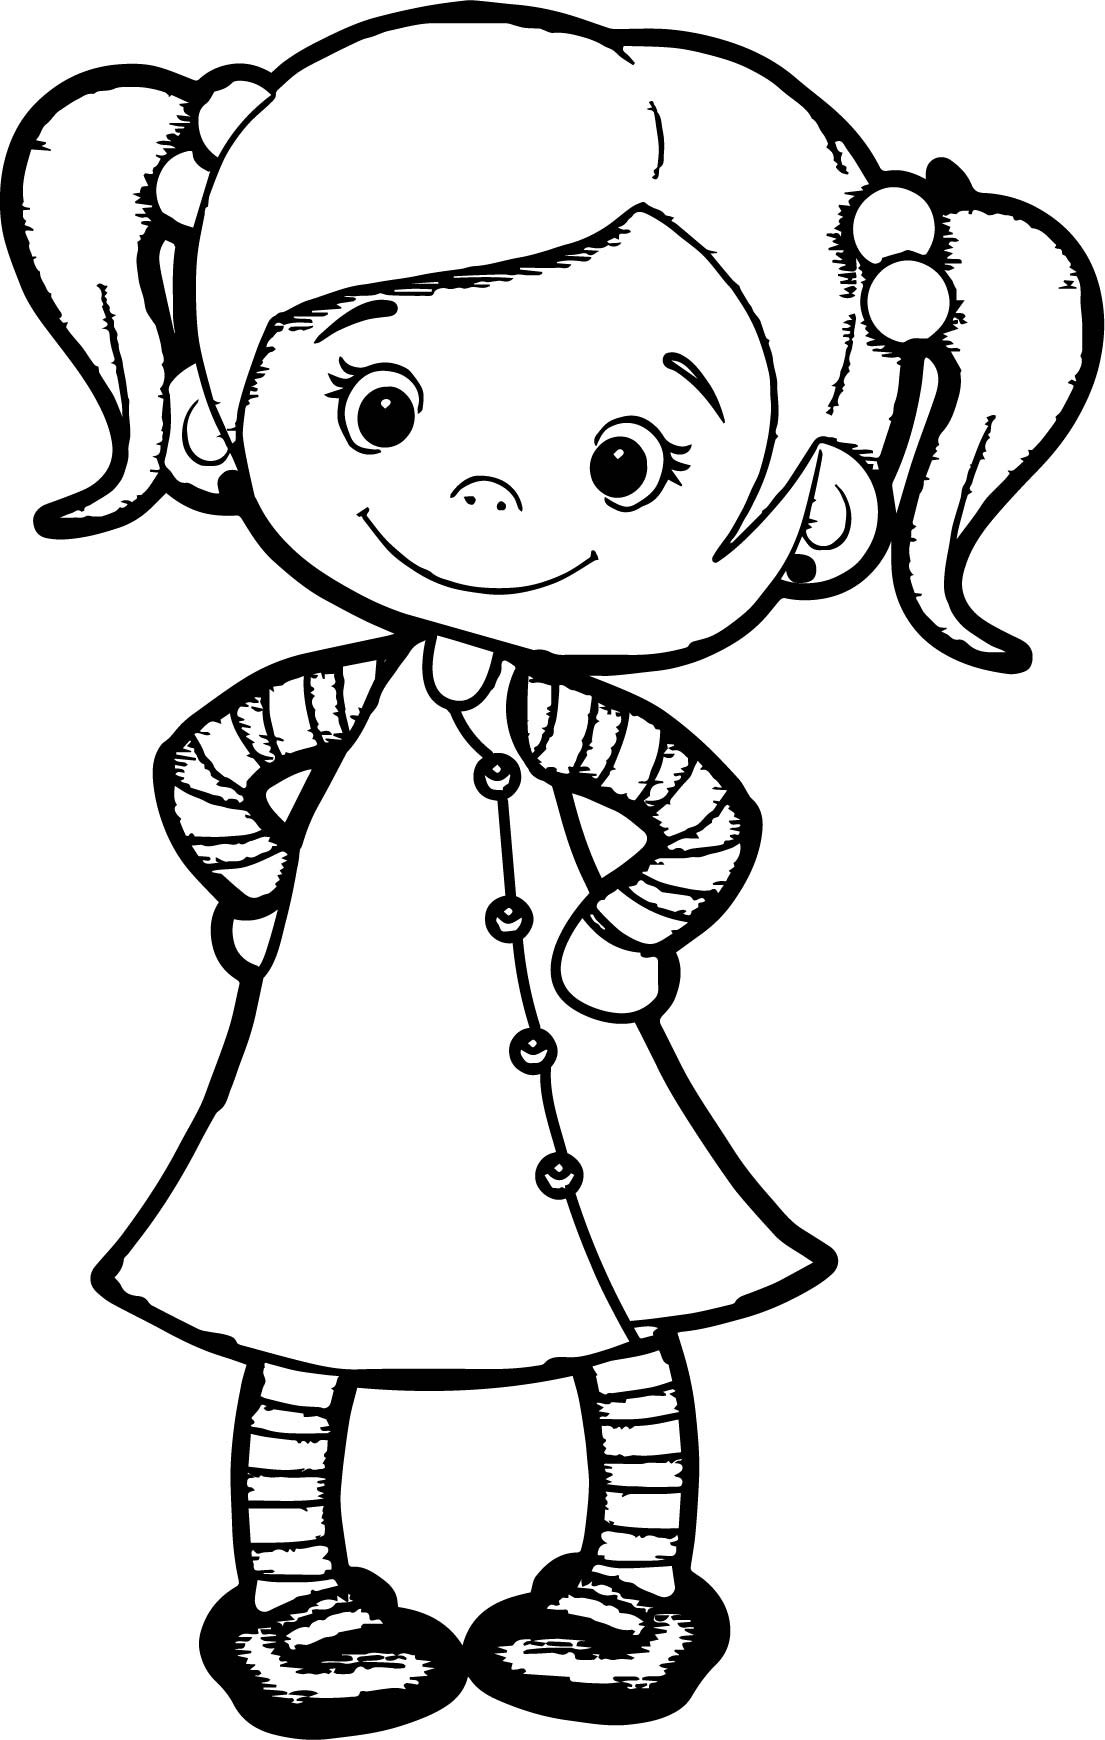 Download Leprechaun Face Coloring Pages at GetDrawings | Free download